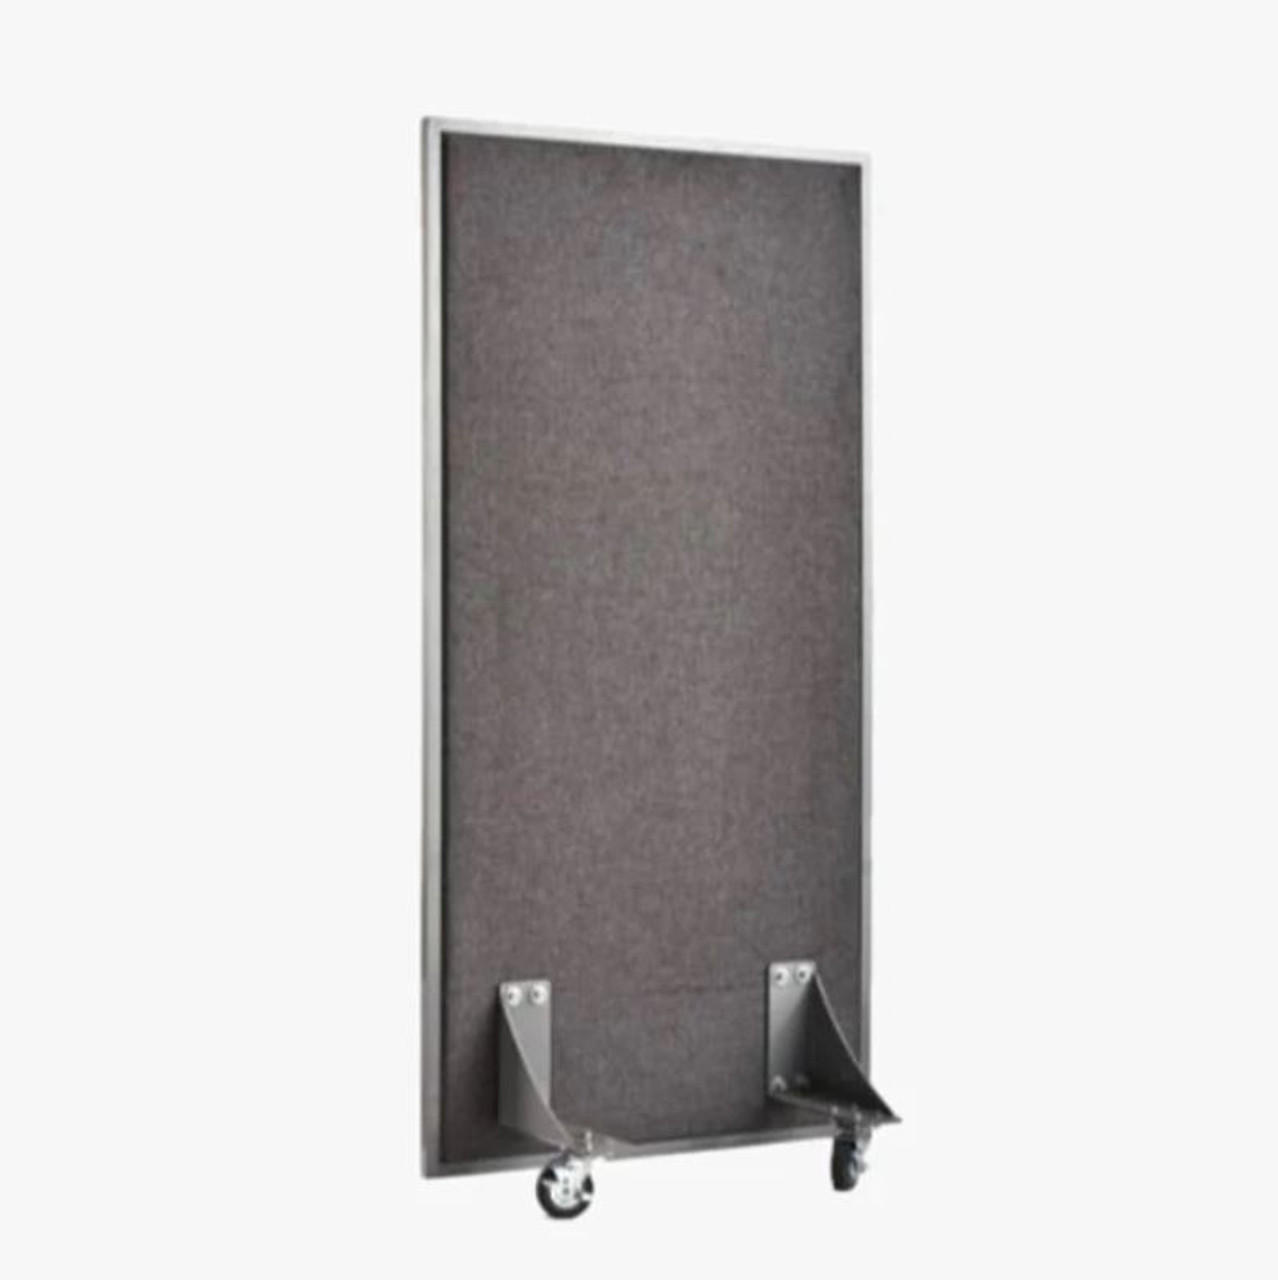 RTS Tactical Ballistic Armor Solid Panel Divider, 36" x 72"